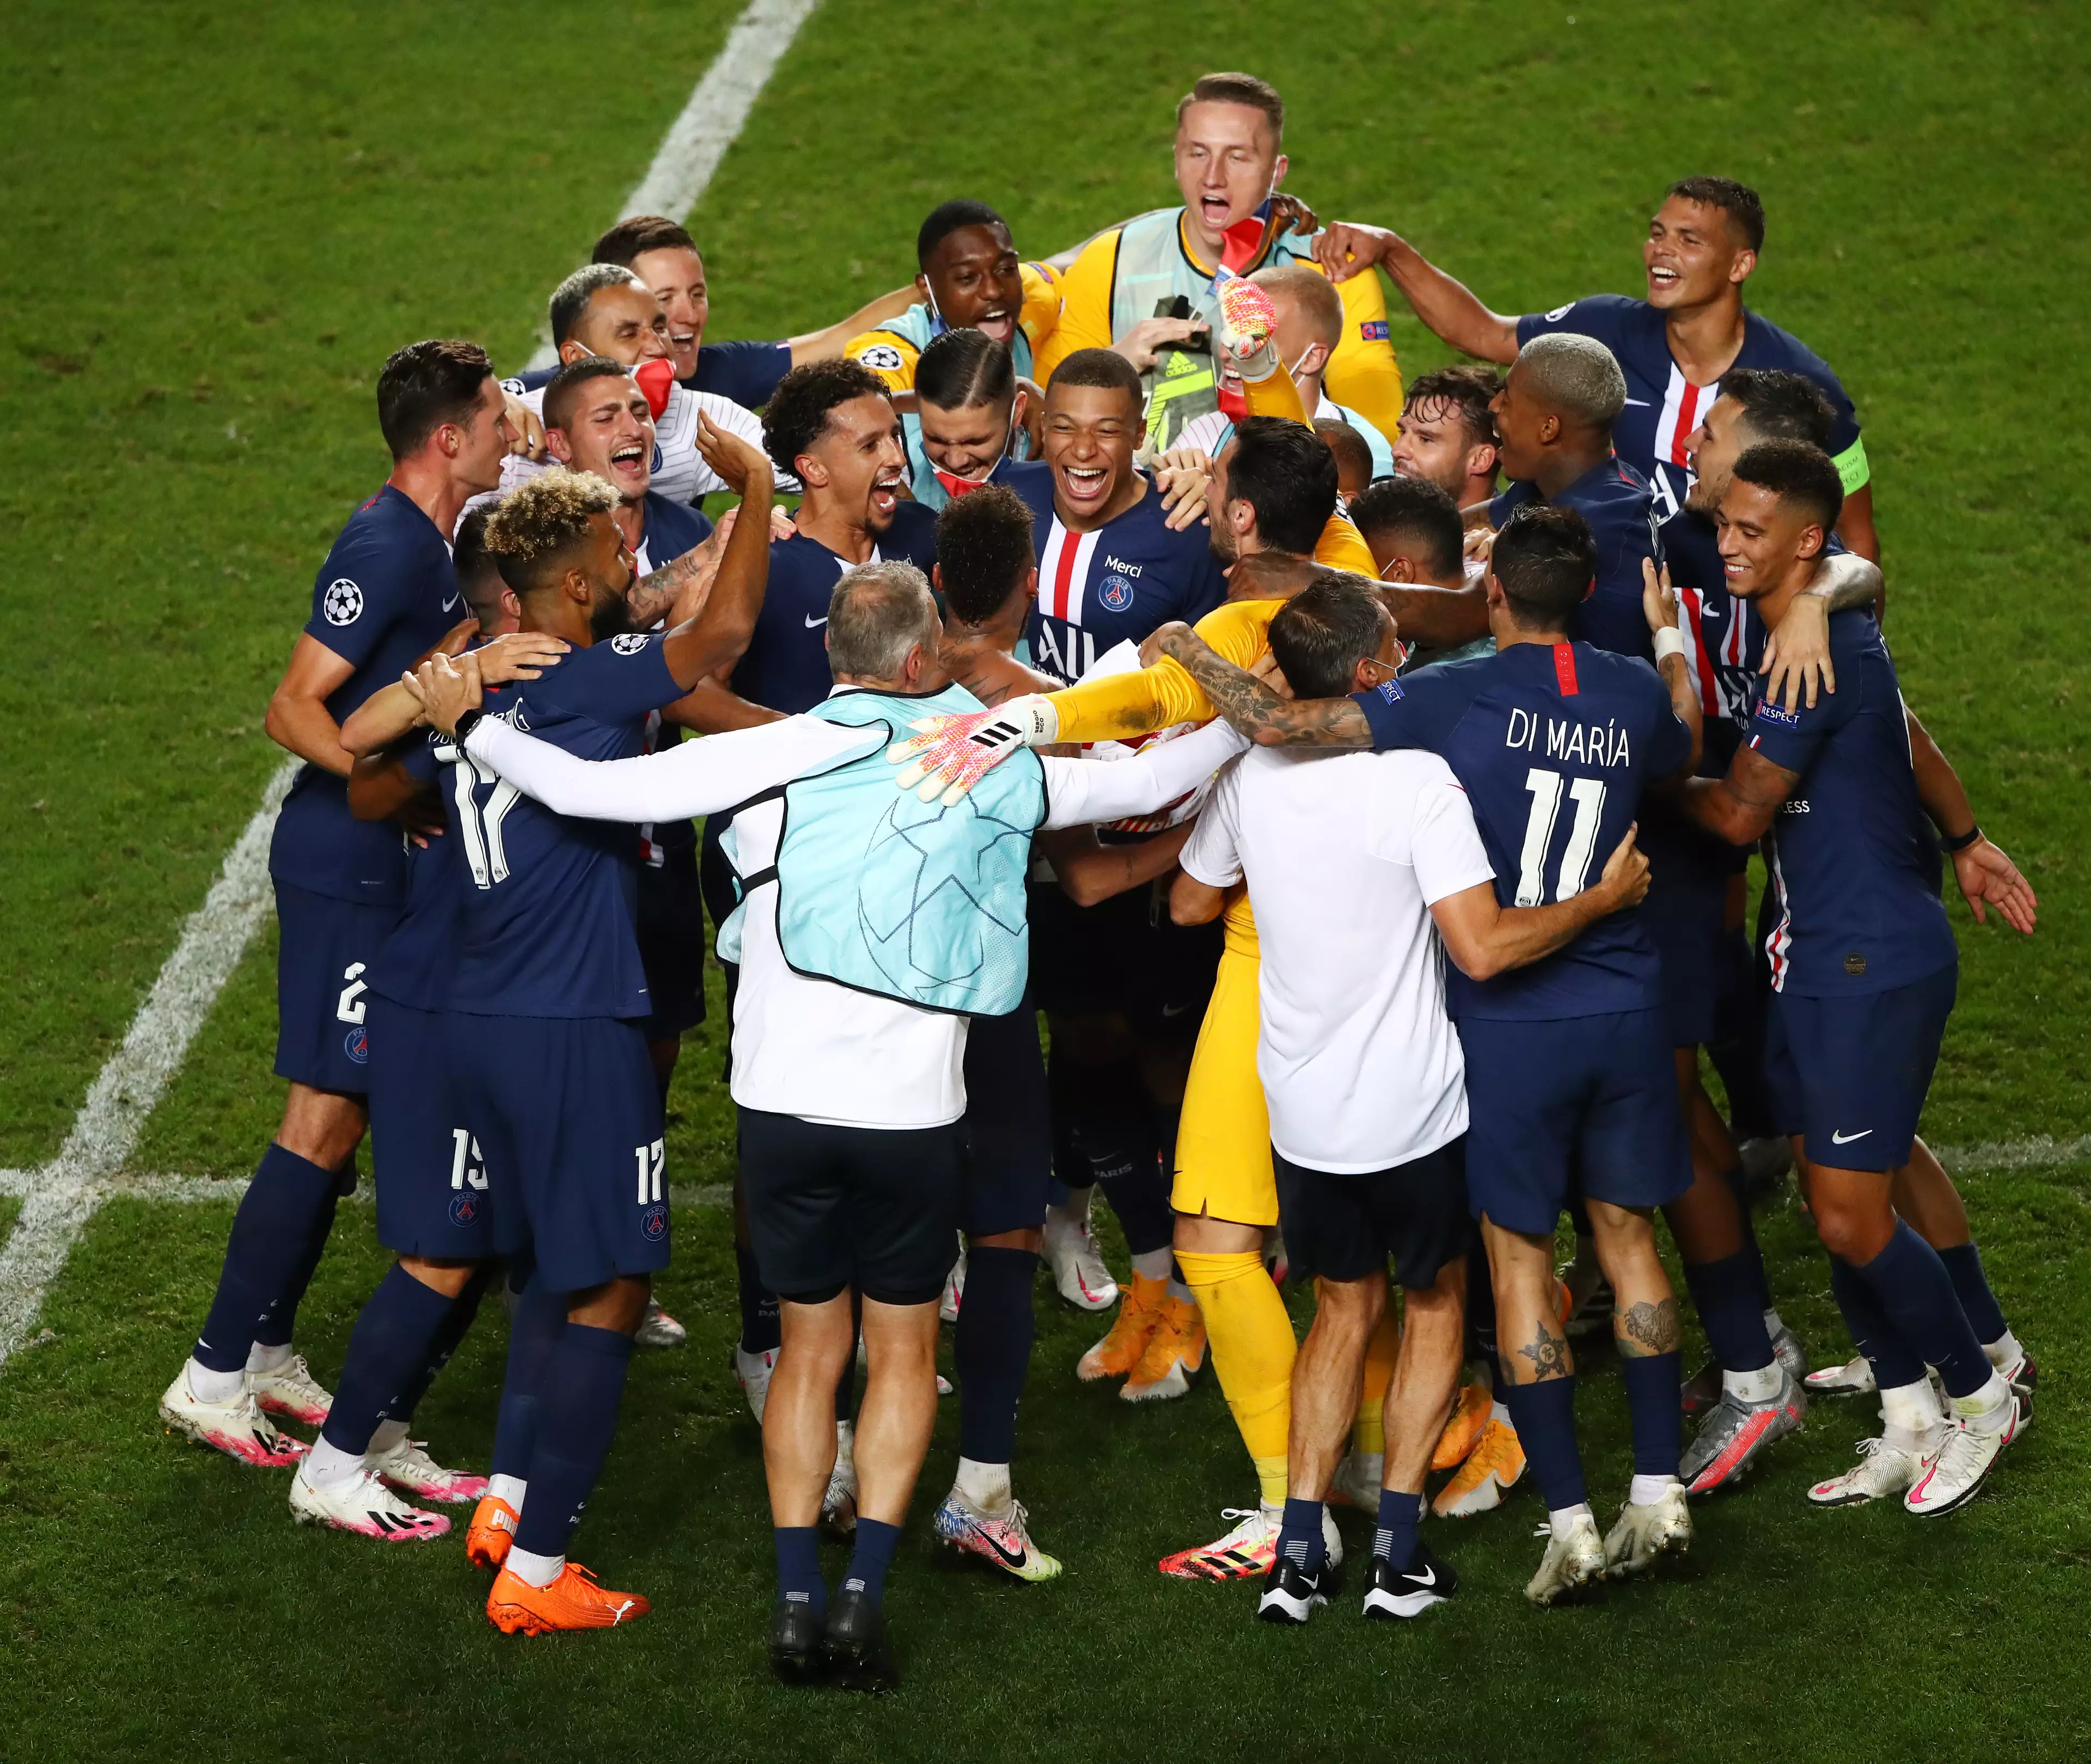 PSG celebrate reaching their first Champions League final. Image: PA Images